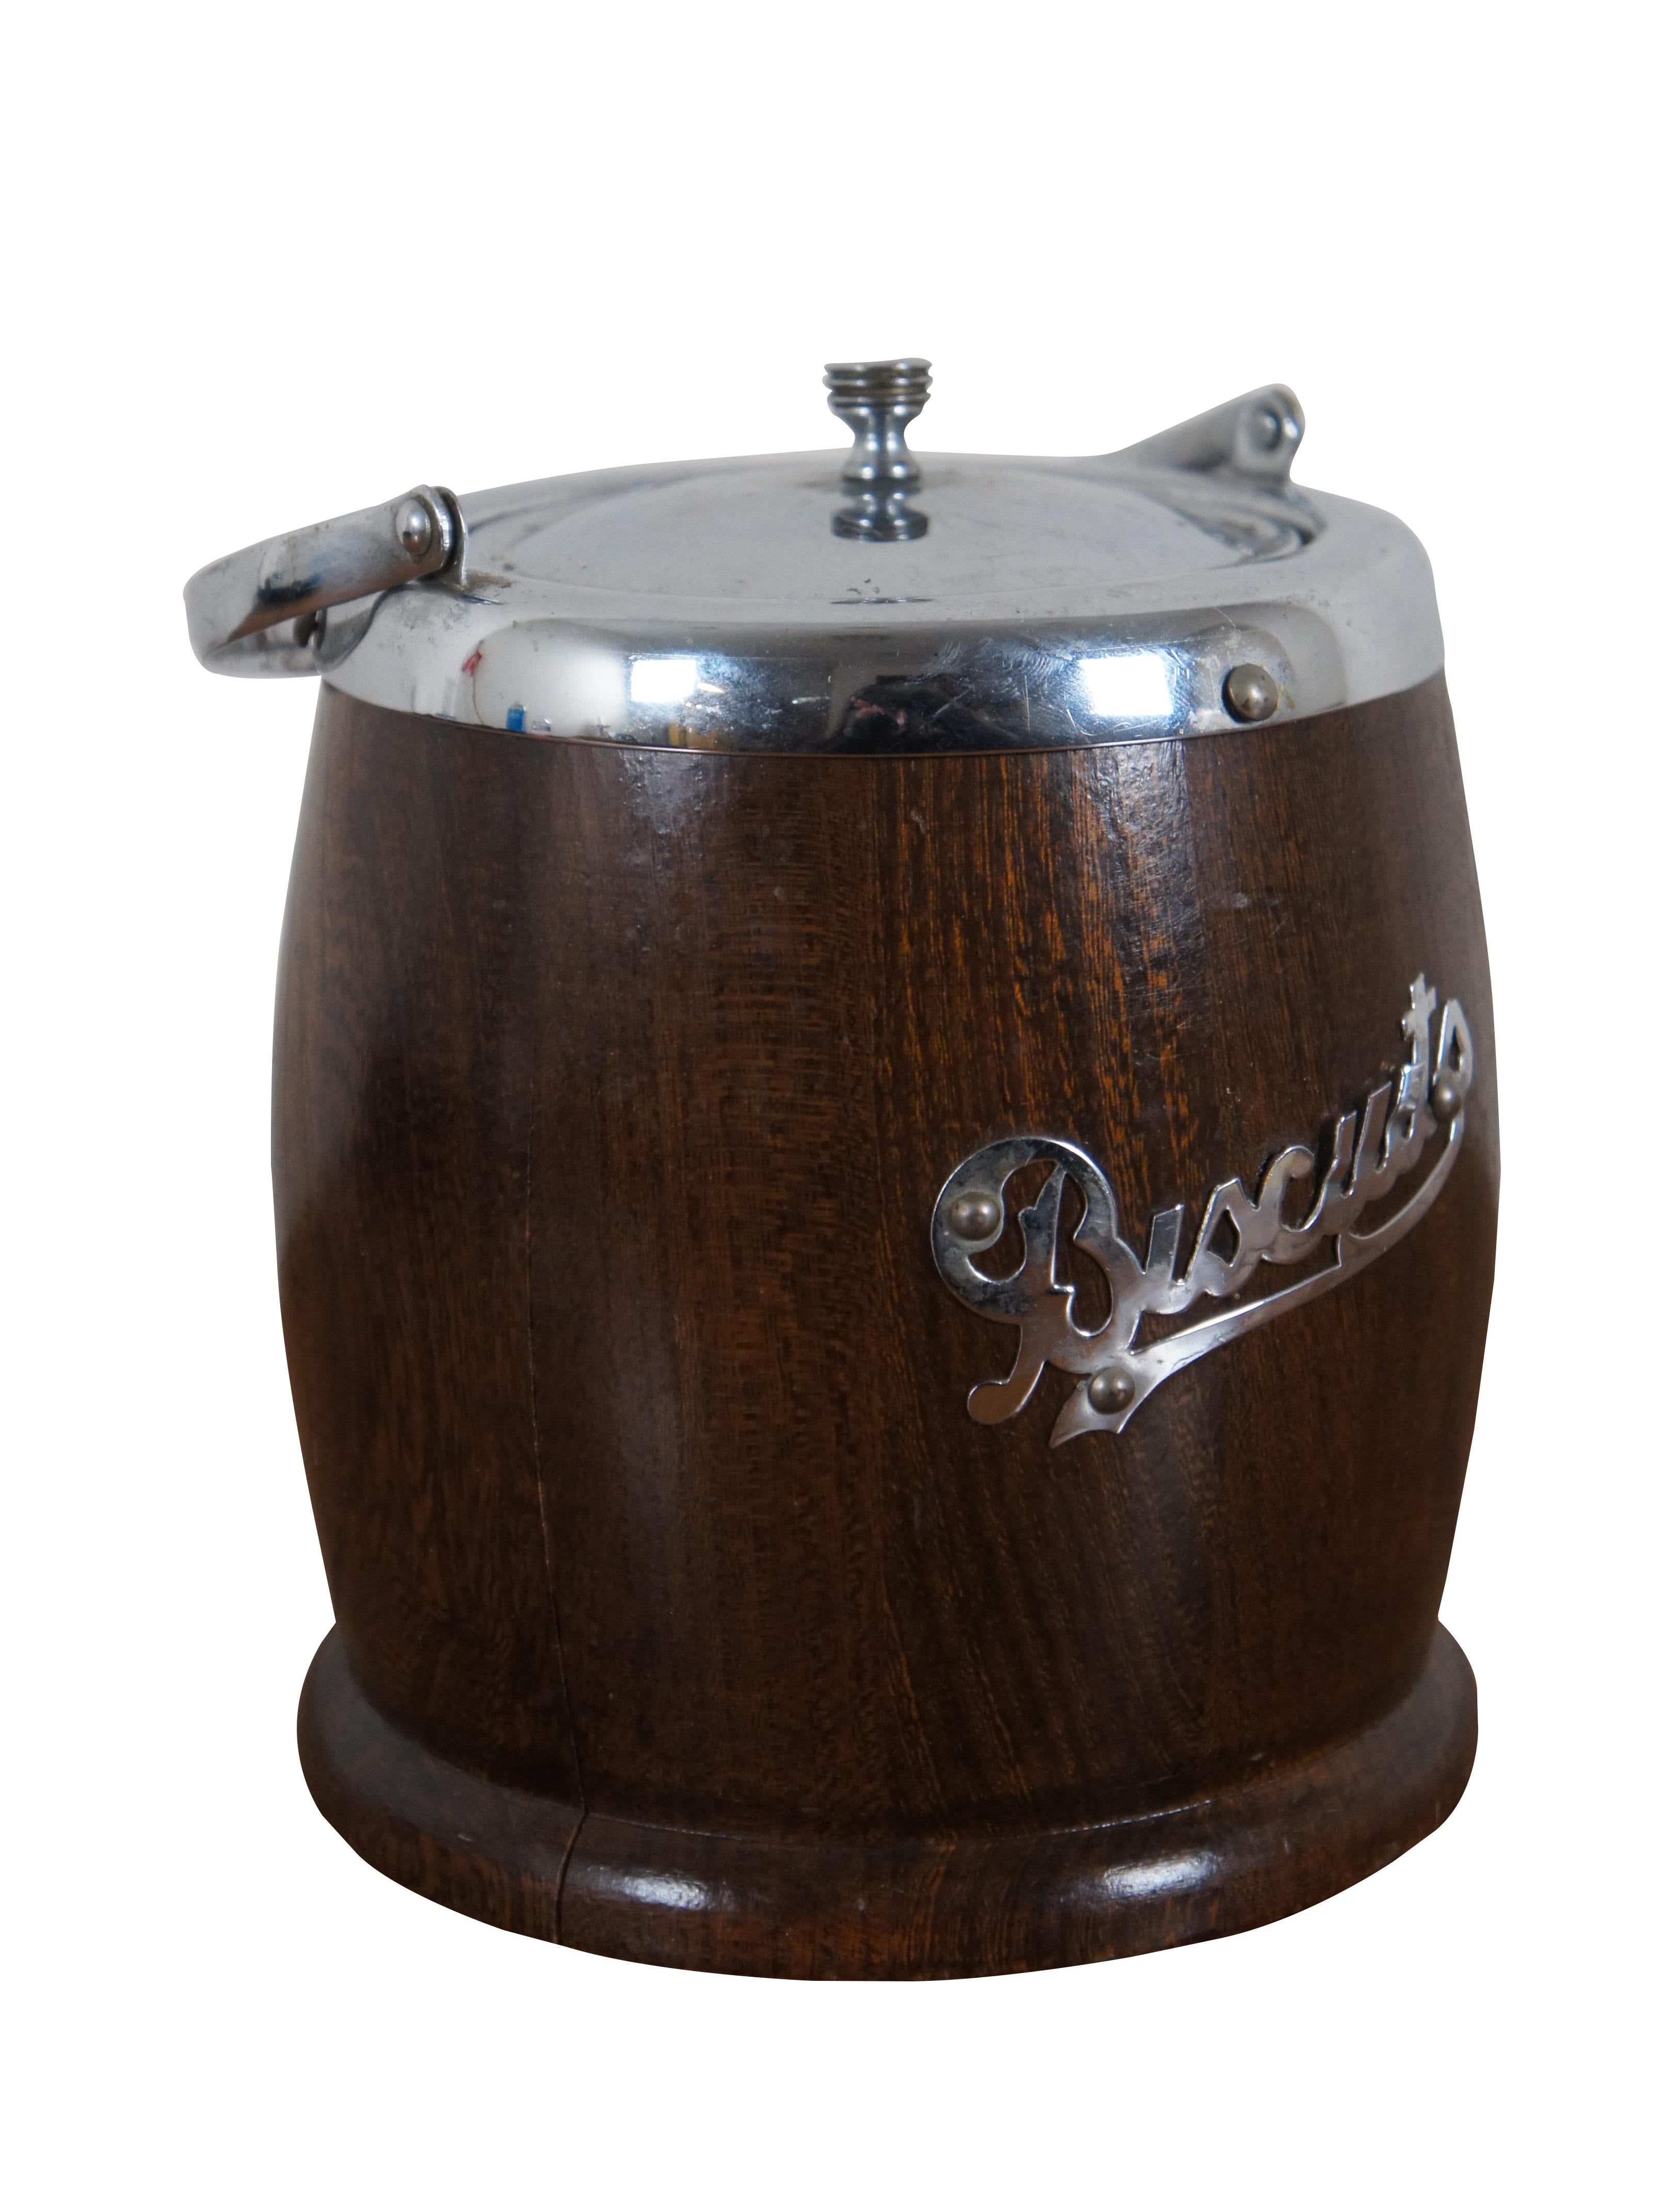 Mid 20th century biscuit / cookie barrel by Lancraft Woodware. Features a traditional barrel shape in dark wood with footed base. Chrome rim, bail handle, lid, and the word 